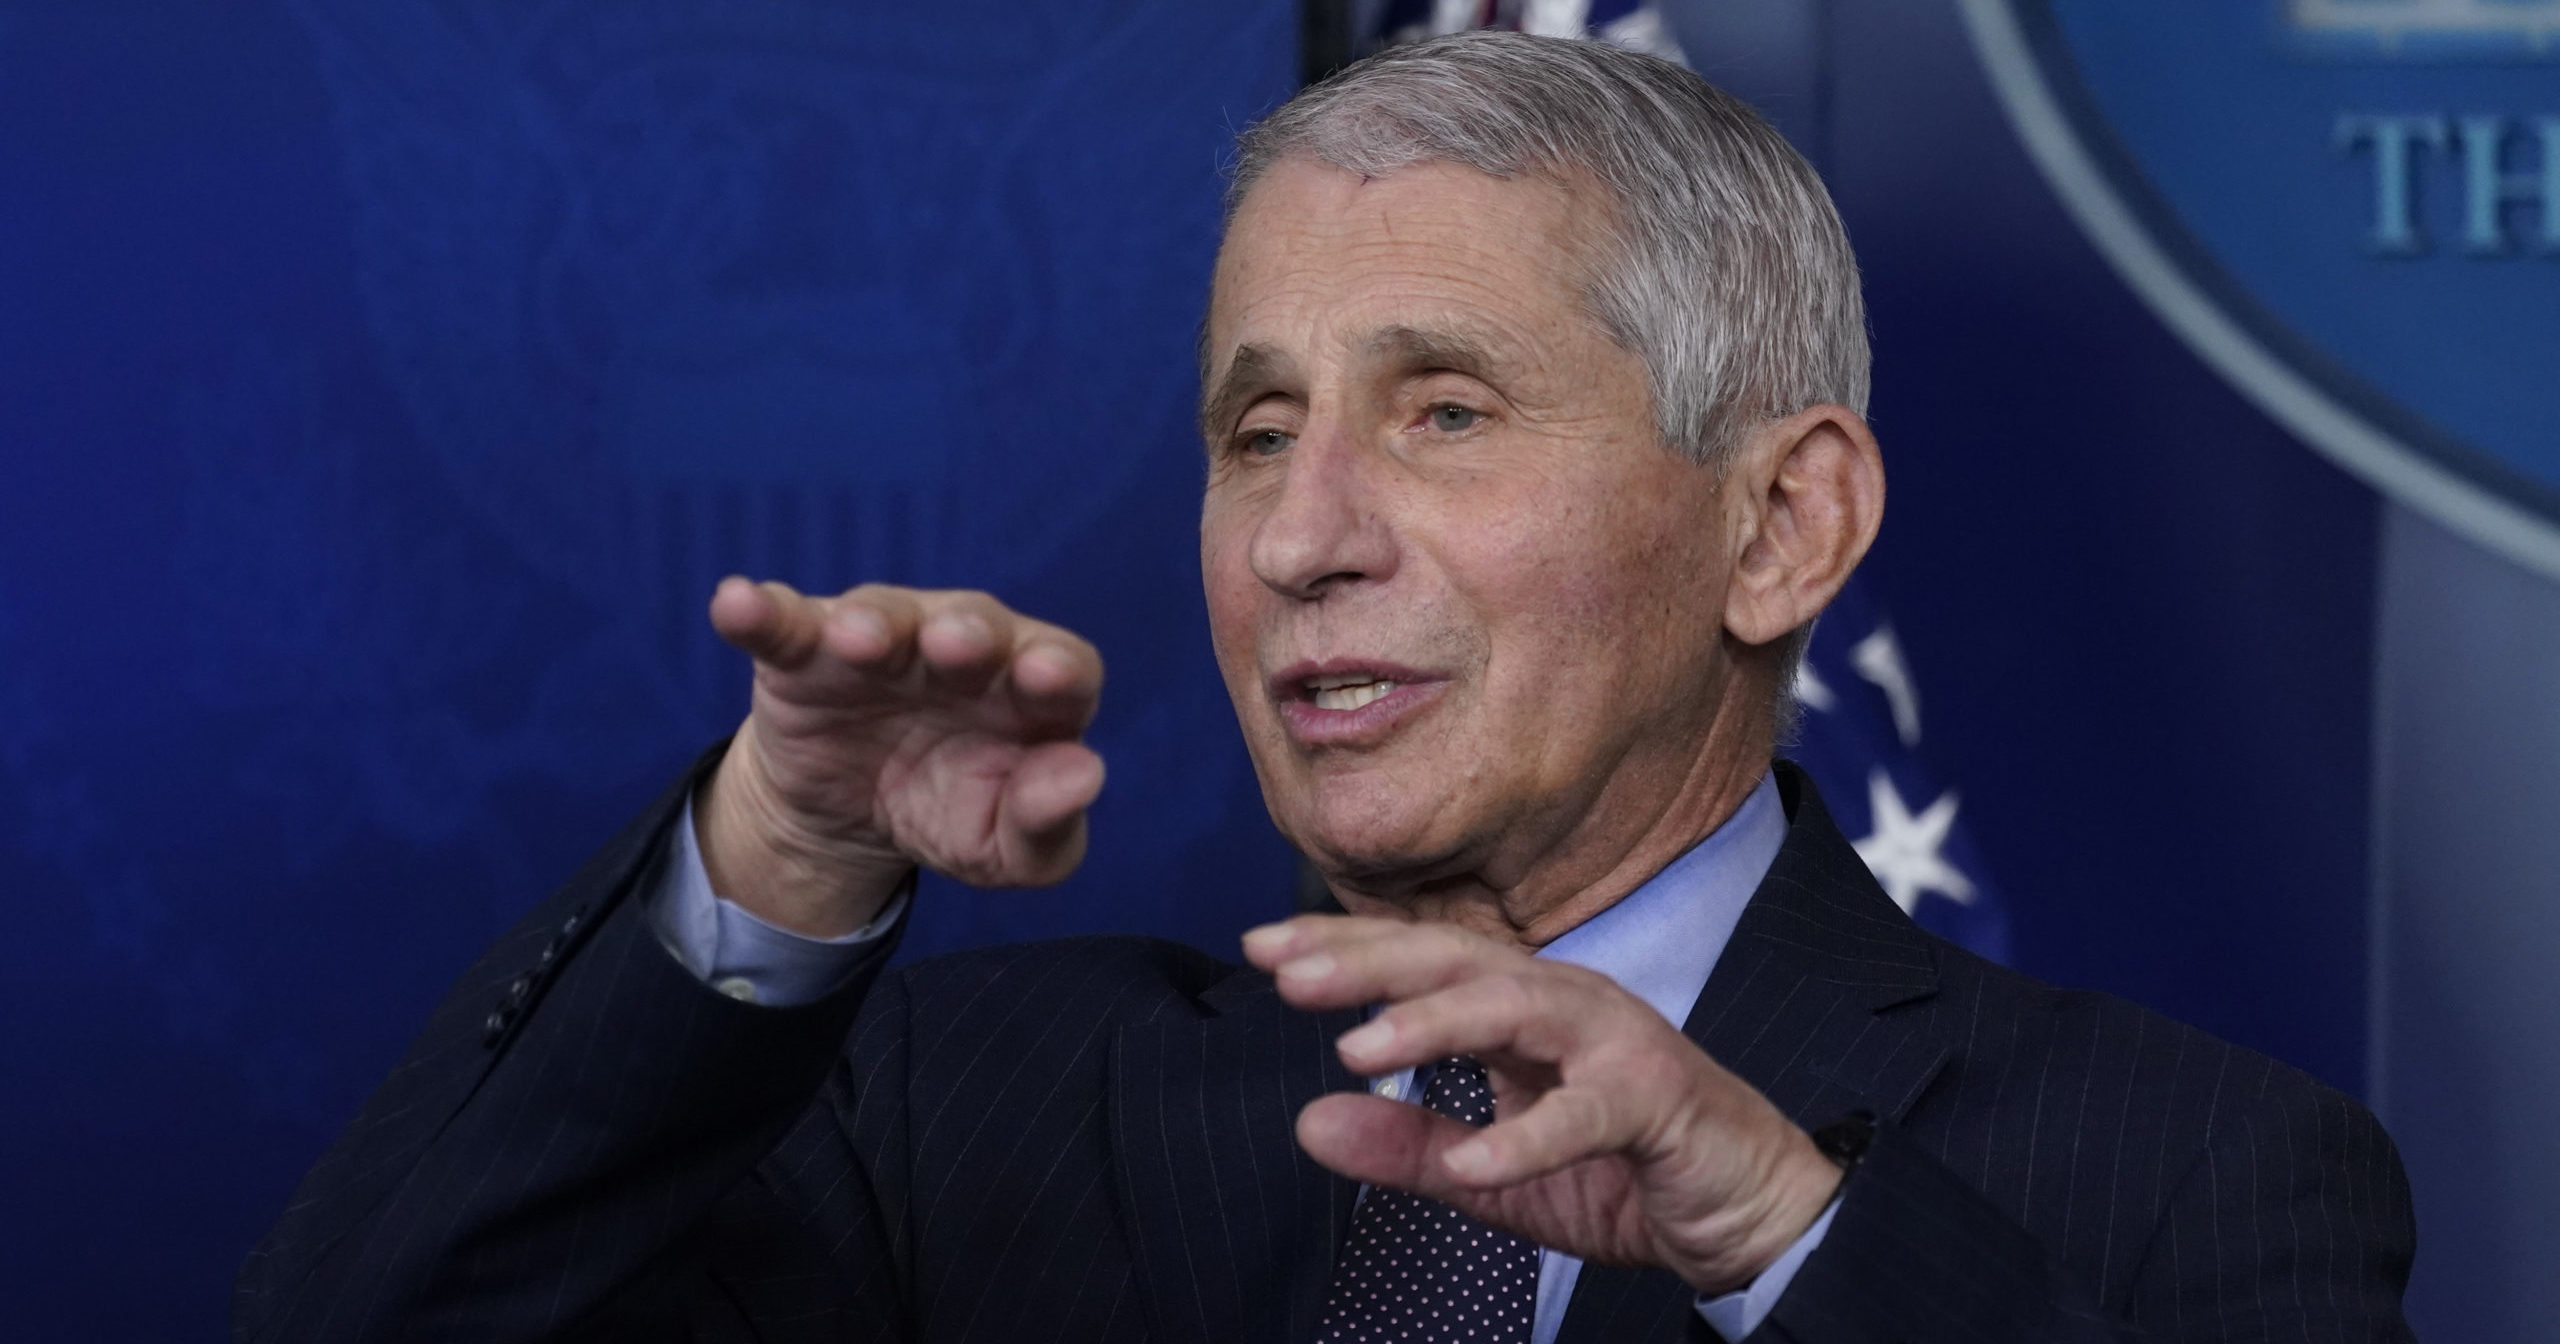 Dr. Anthony Fauci, director of the National Institute of Allergy and Infectious Diseases, speaks with reporters at the White House in Washington on Jan. 21.